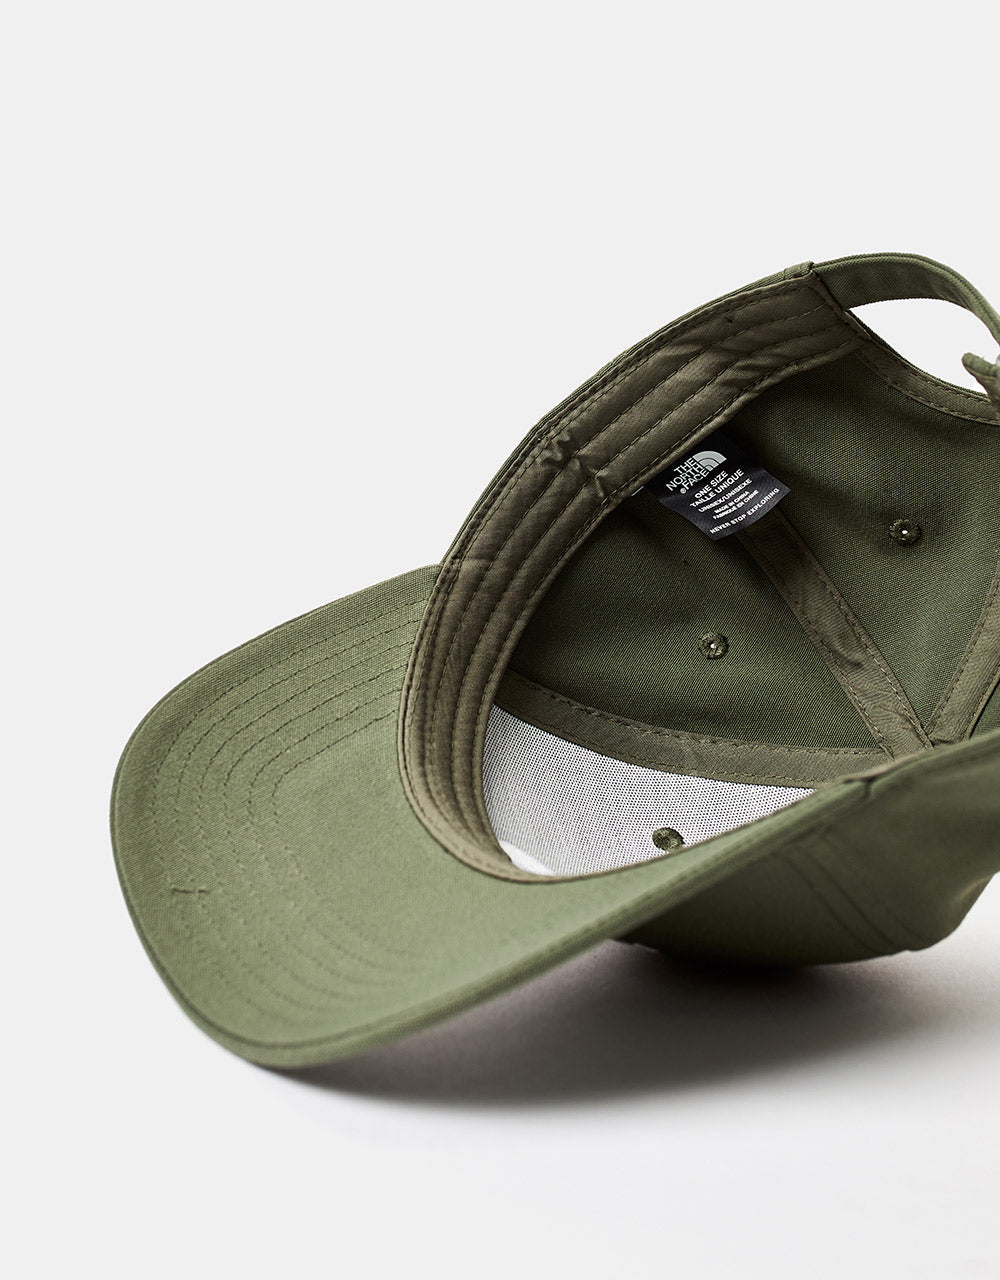 The North Face Recycled 66 Classic Cap - Thyme